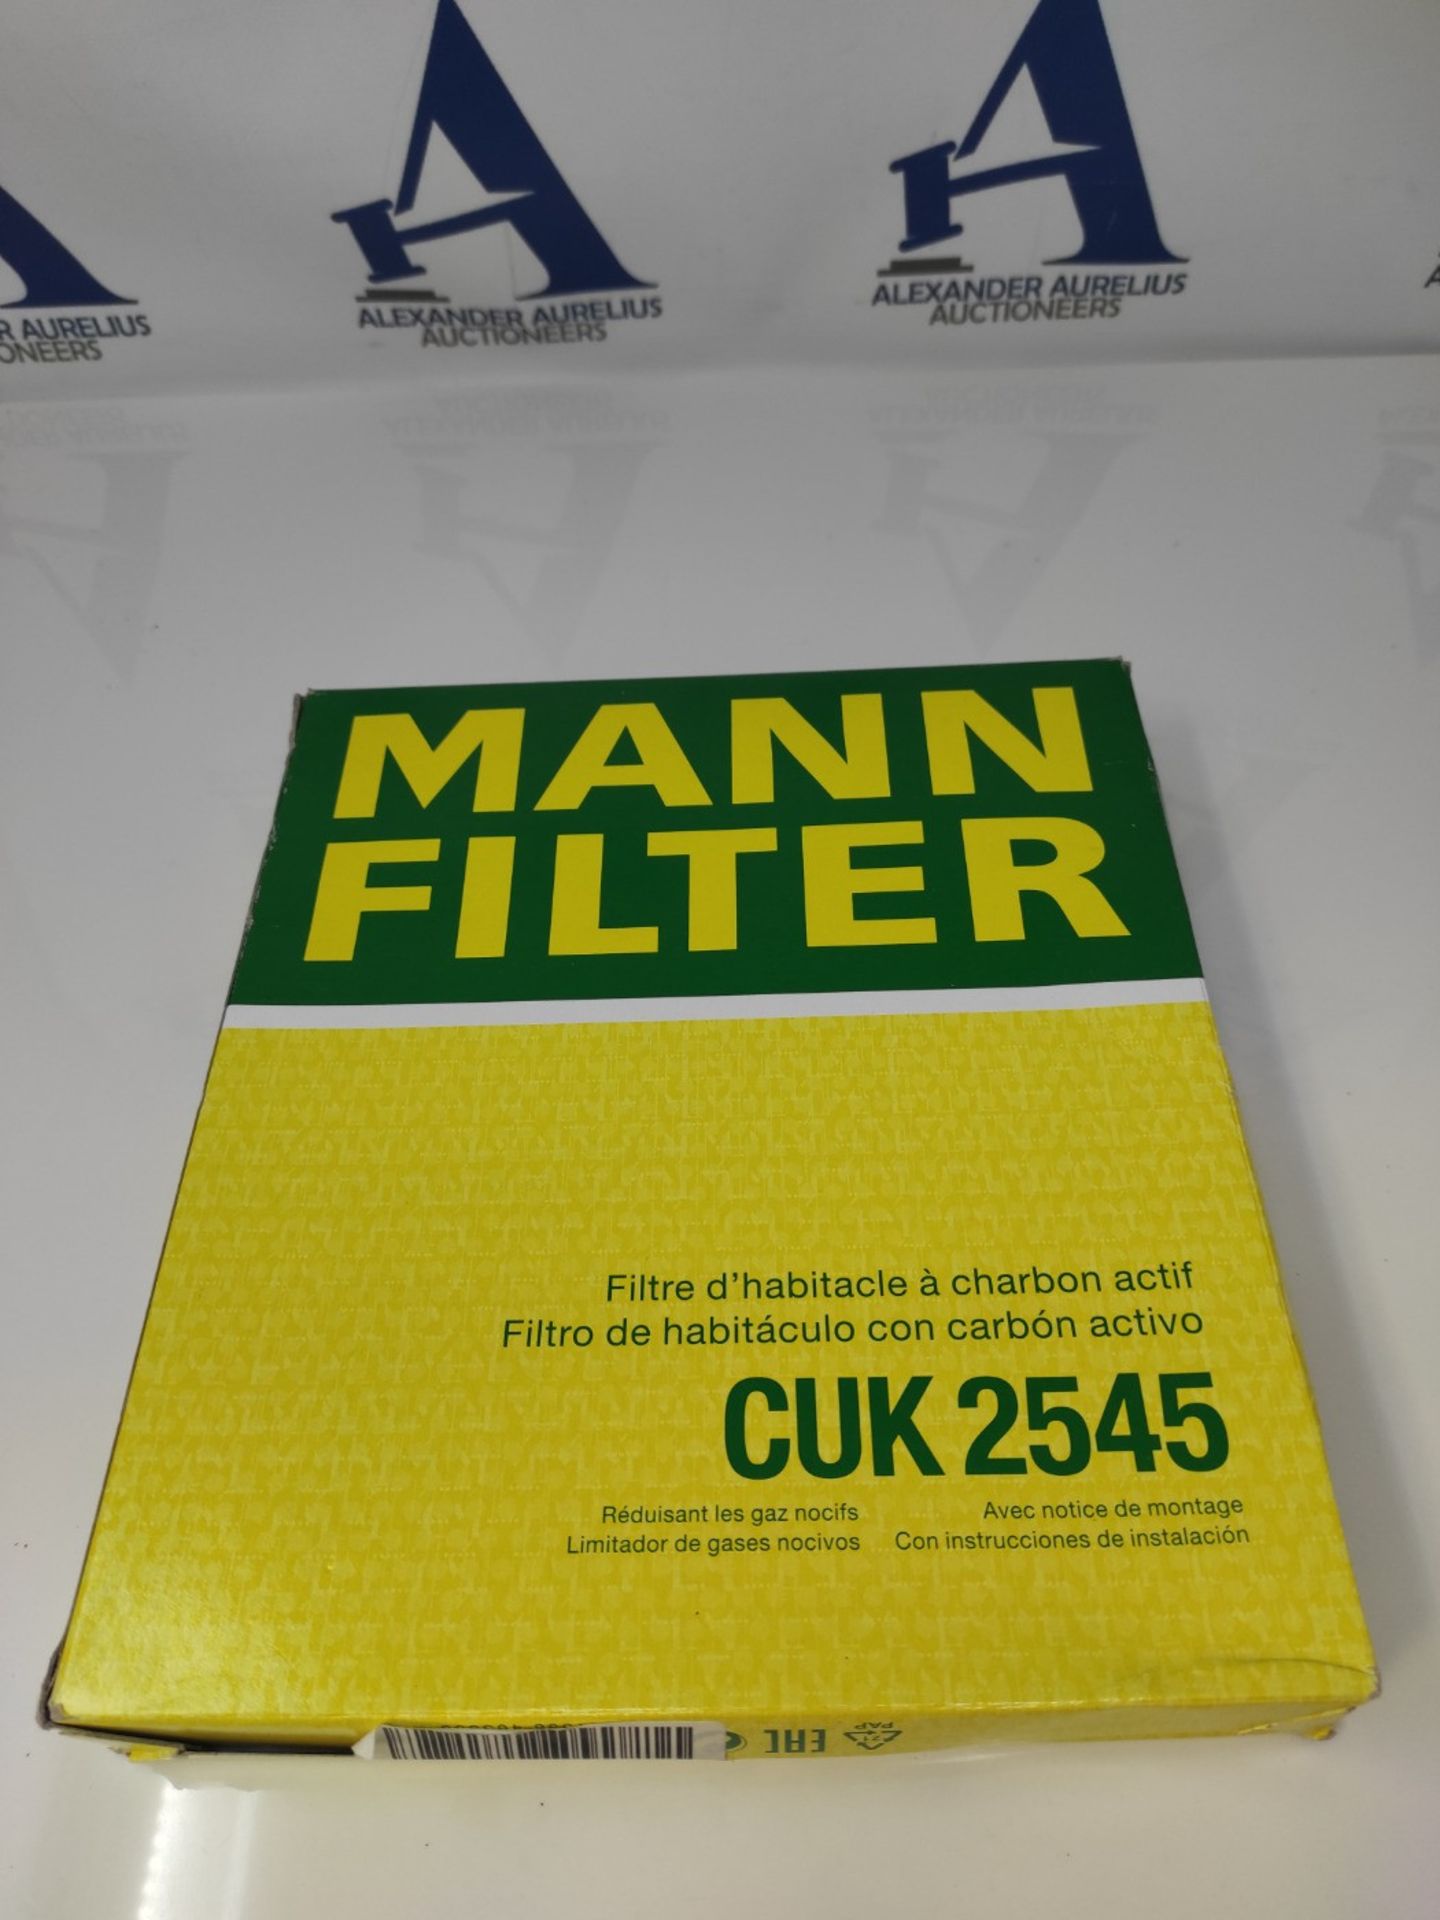 MANN-FILTER CUK 2545 Interior Filter - Pollen Filter with Activated Carbon - For Cars - Image 2 of 3